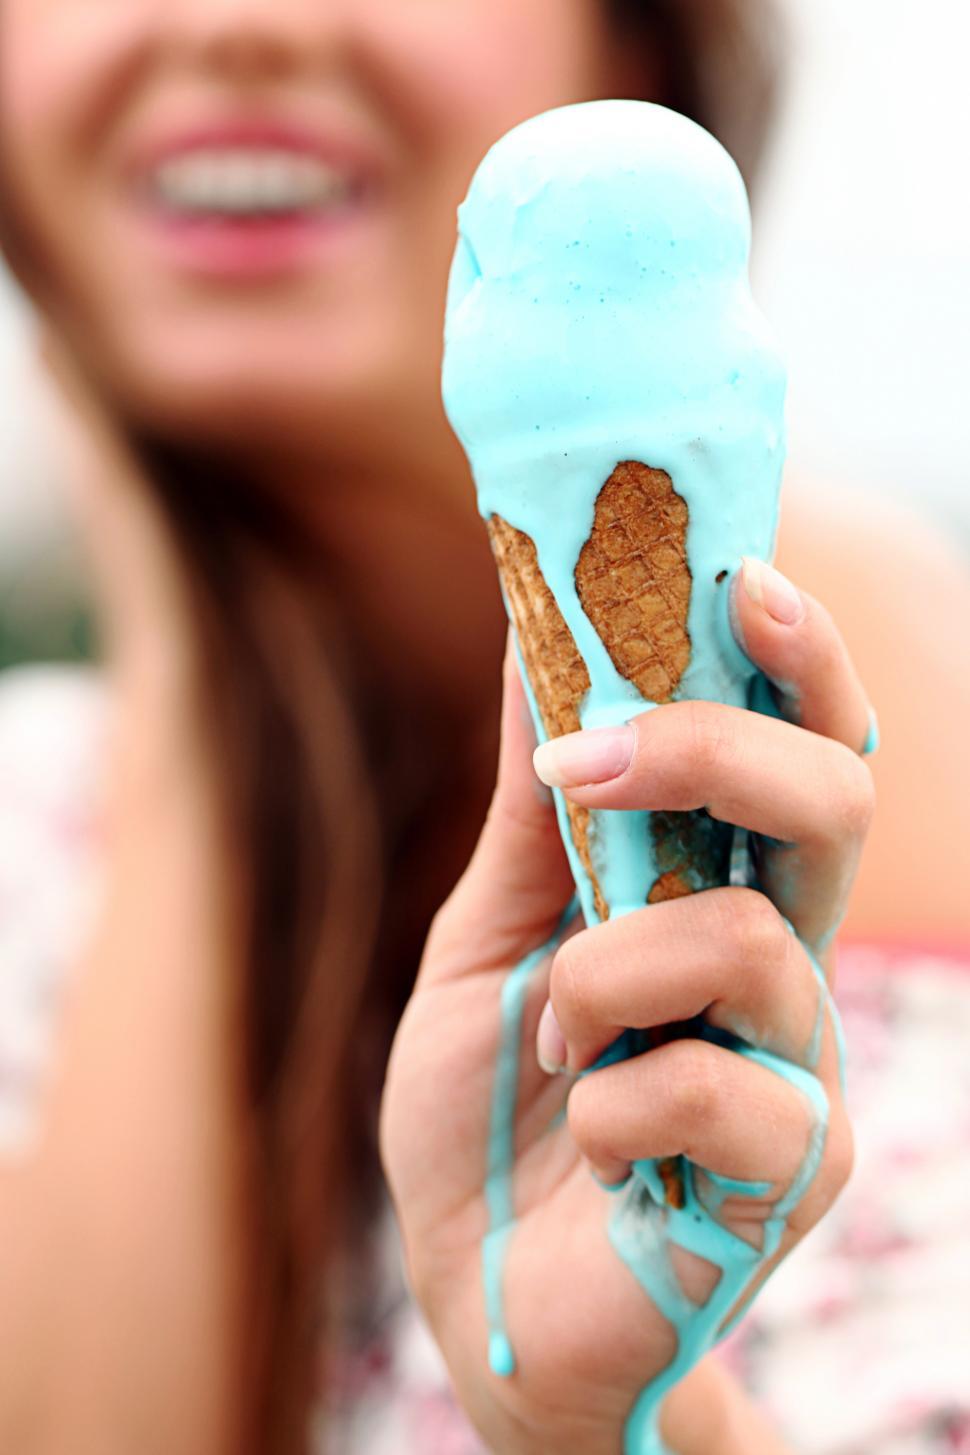 Download Free Stock Photo of Woman with melting ice cream cone 